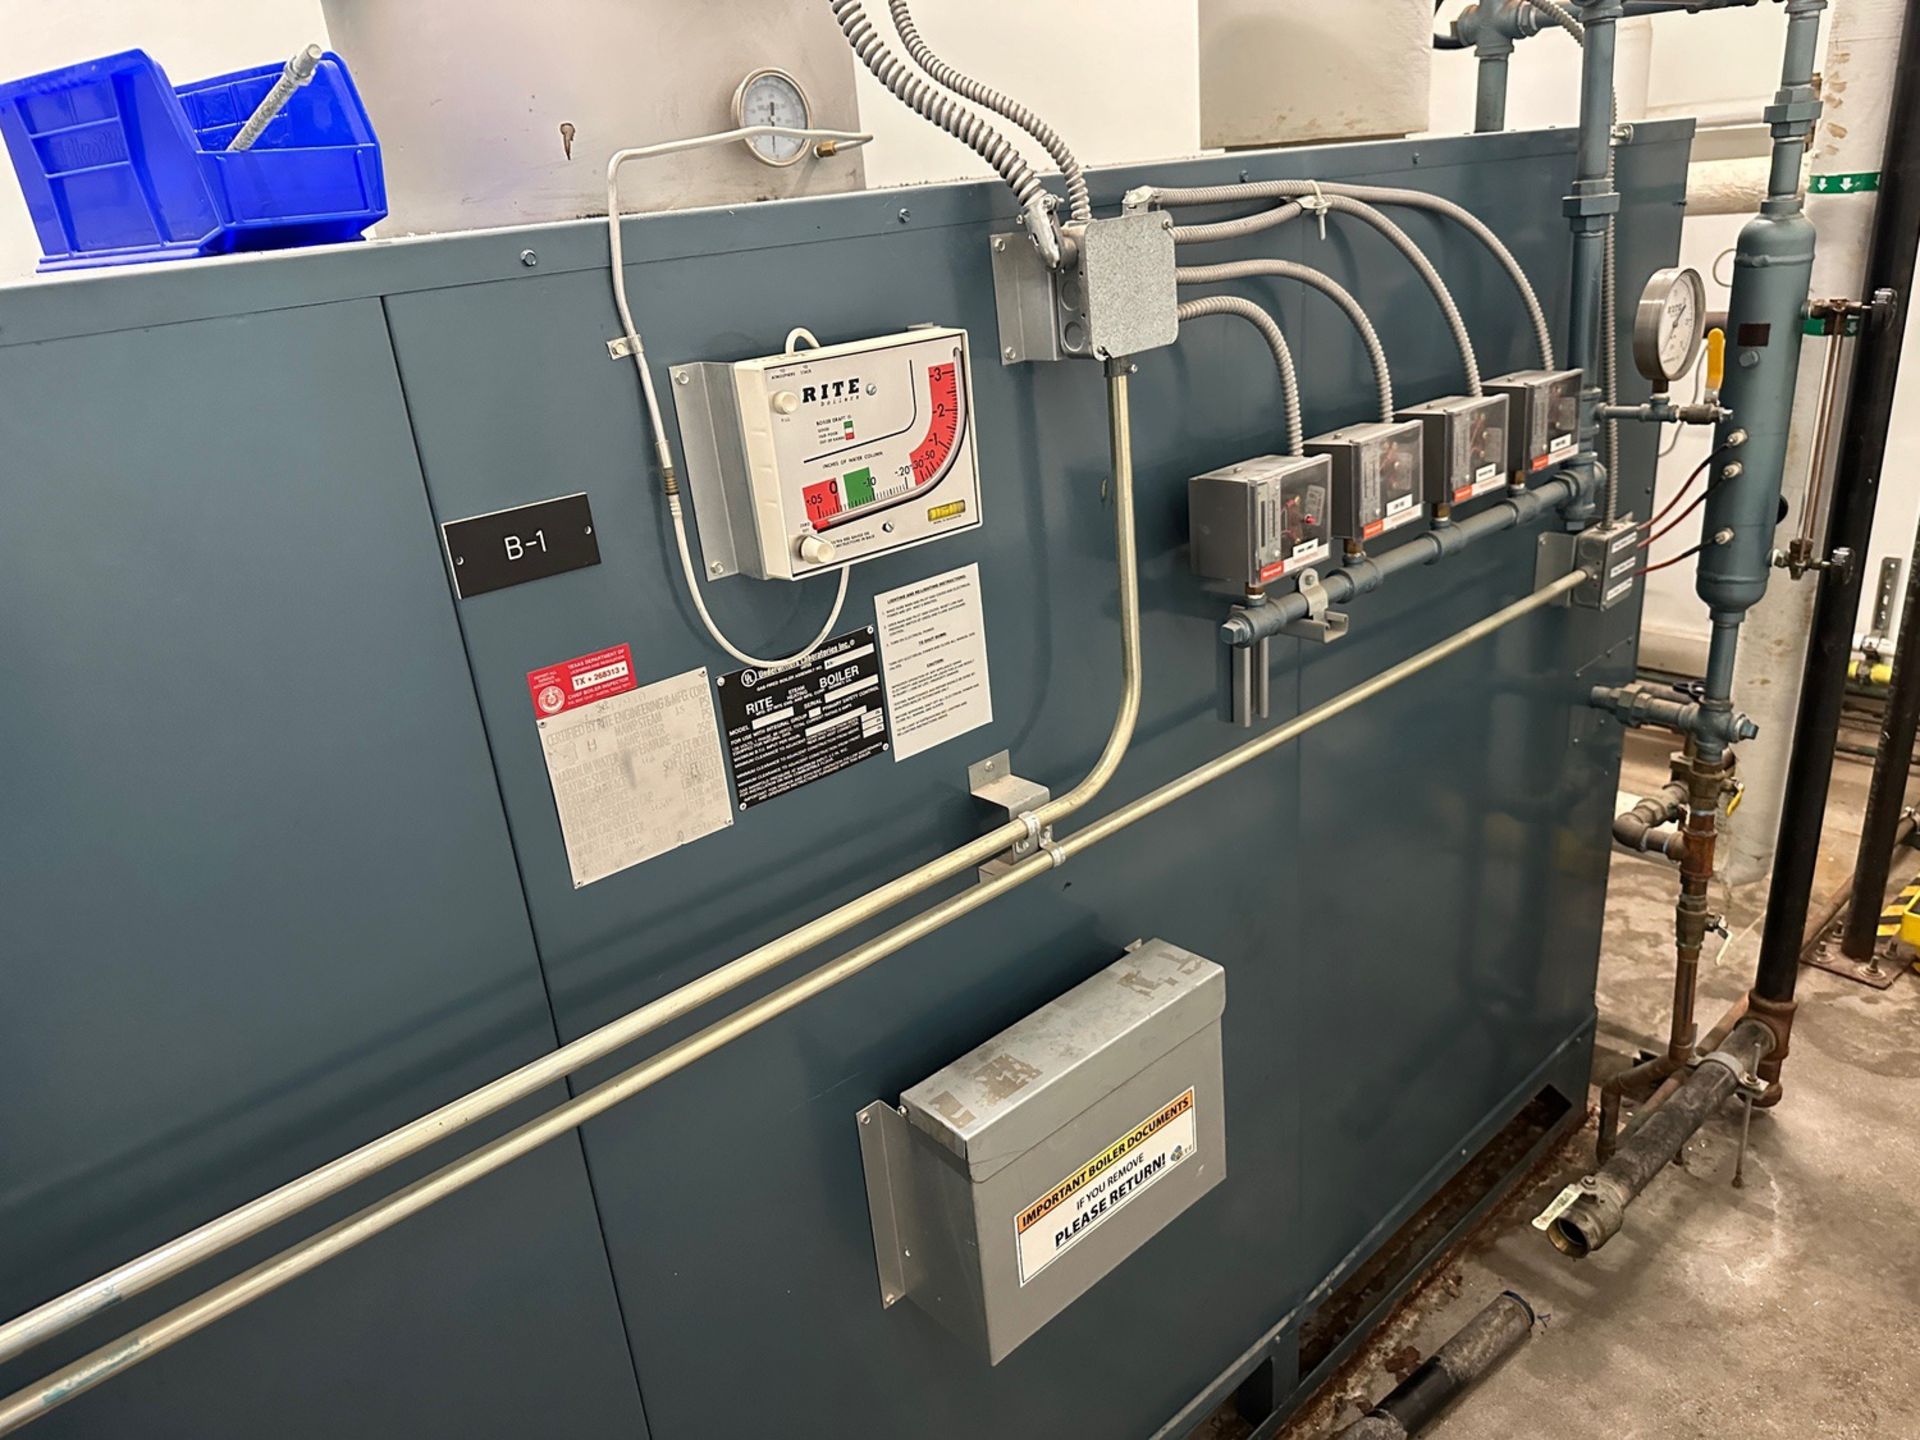 Rite Model 325 S Boiler with Water Treatment System and Blowdown Tank, Max 3.25 MBT | Rig Fee $750 - Image 2 of 6